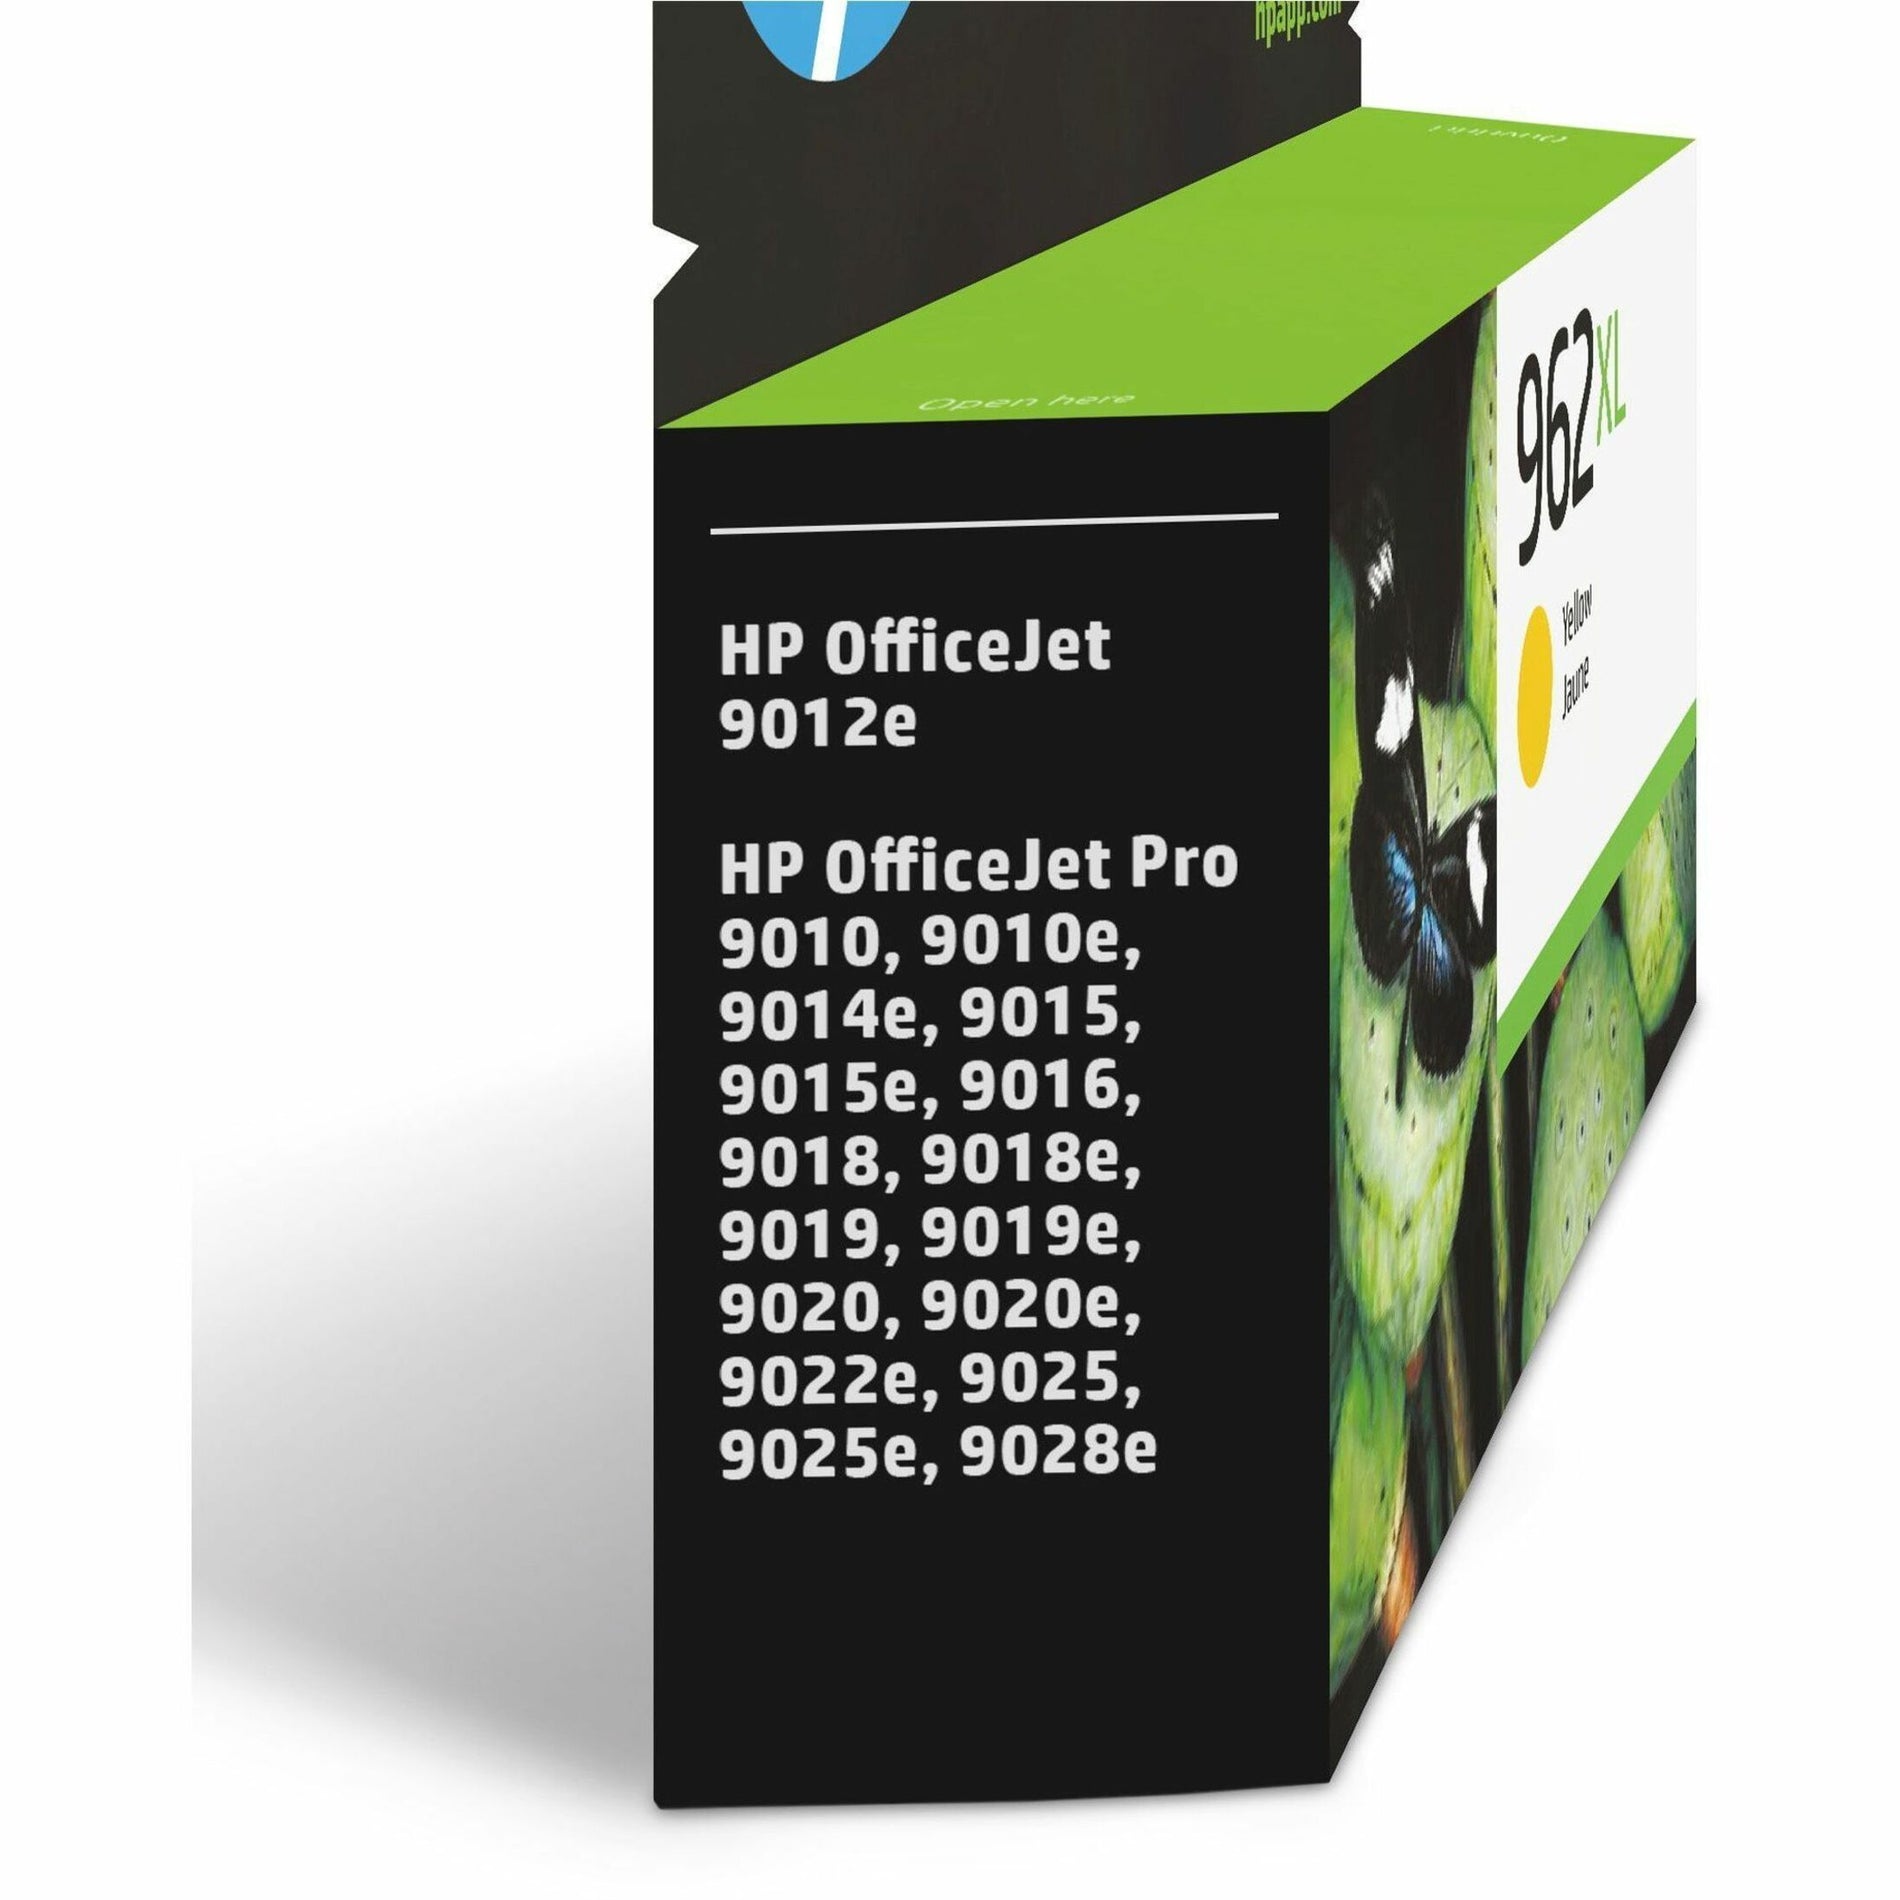 HP 3JA02AN 962XL High Yield Ink Cartridge, Yellow, 1600 Pages